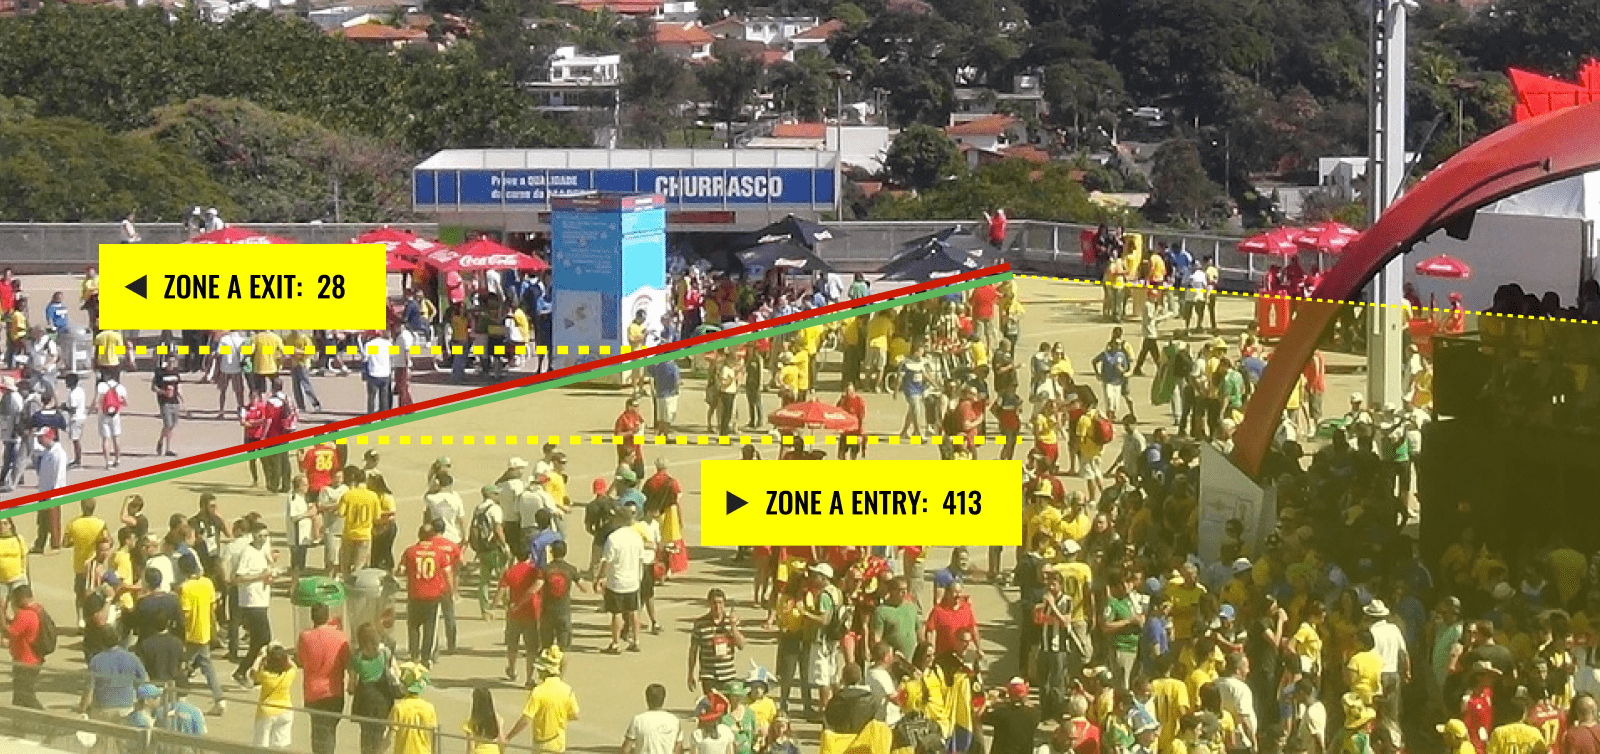 Read full post: Event Safety and Efficiency with Advanced Crowd and Traffic Analysis